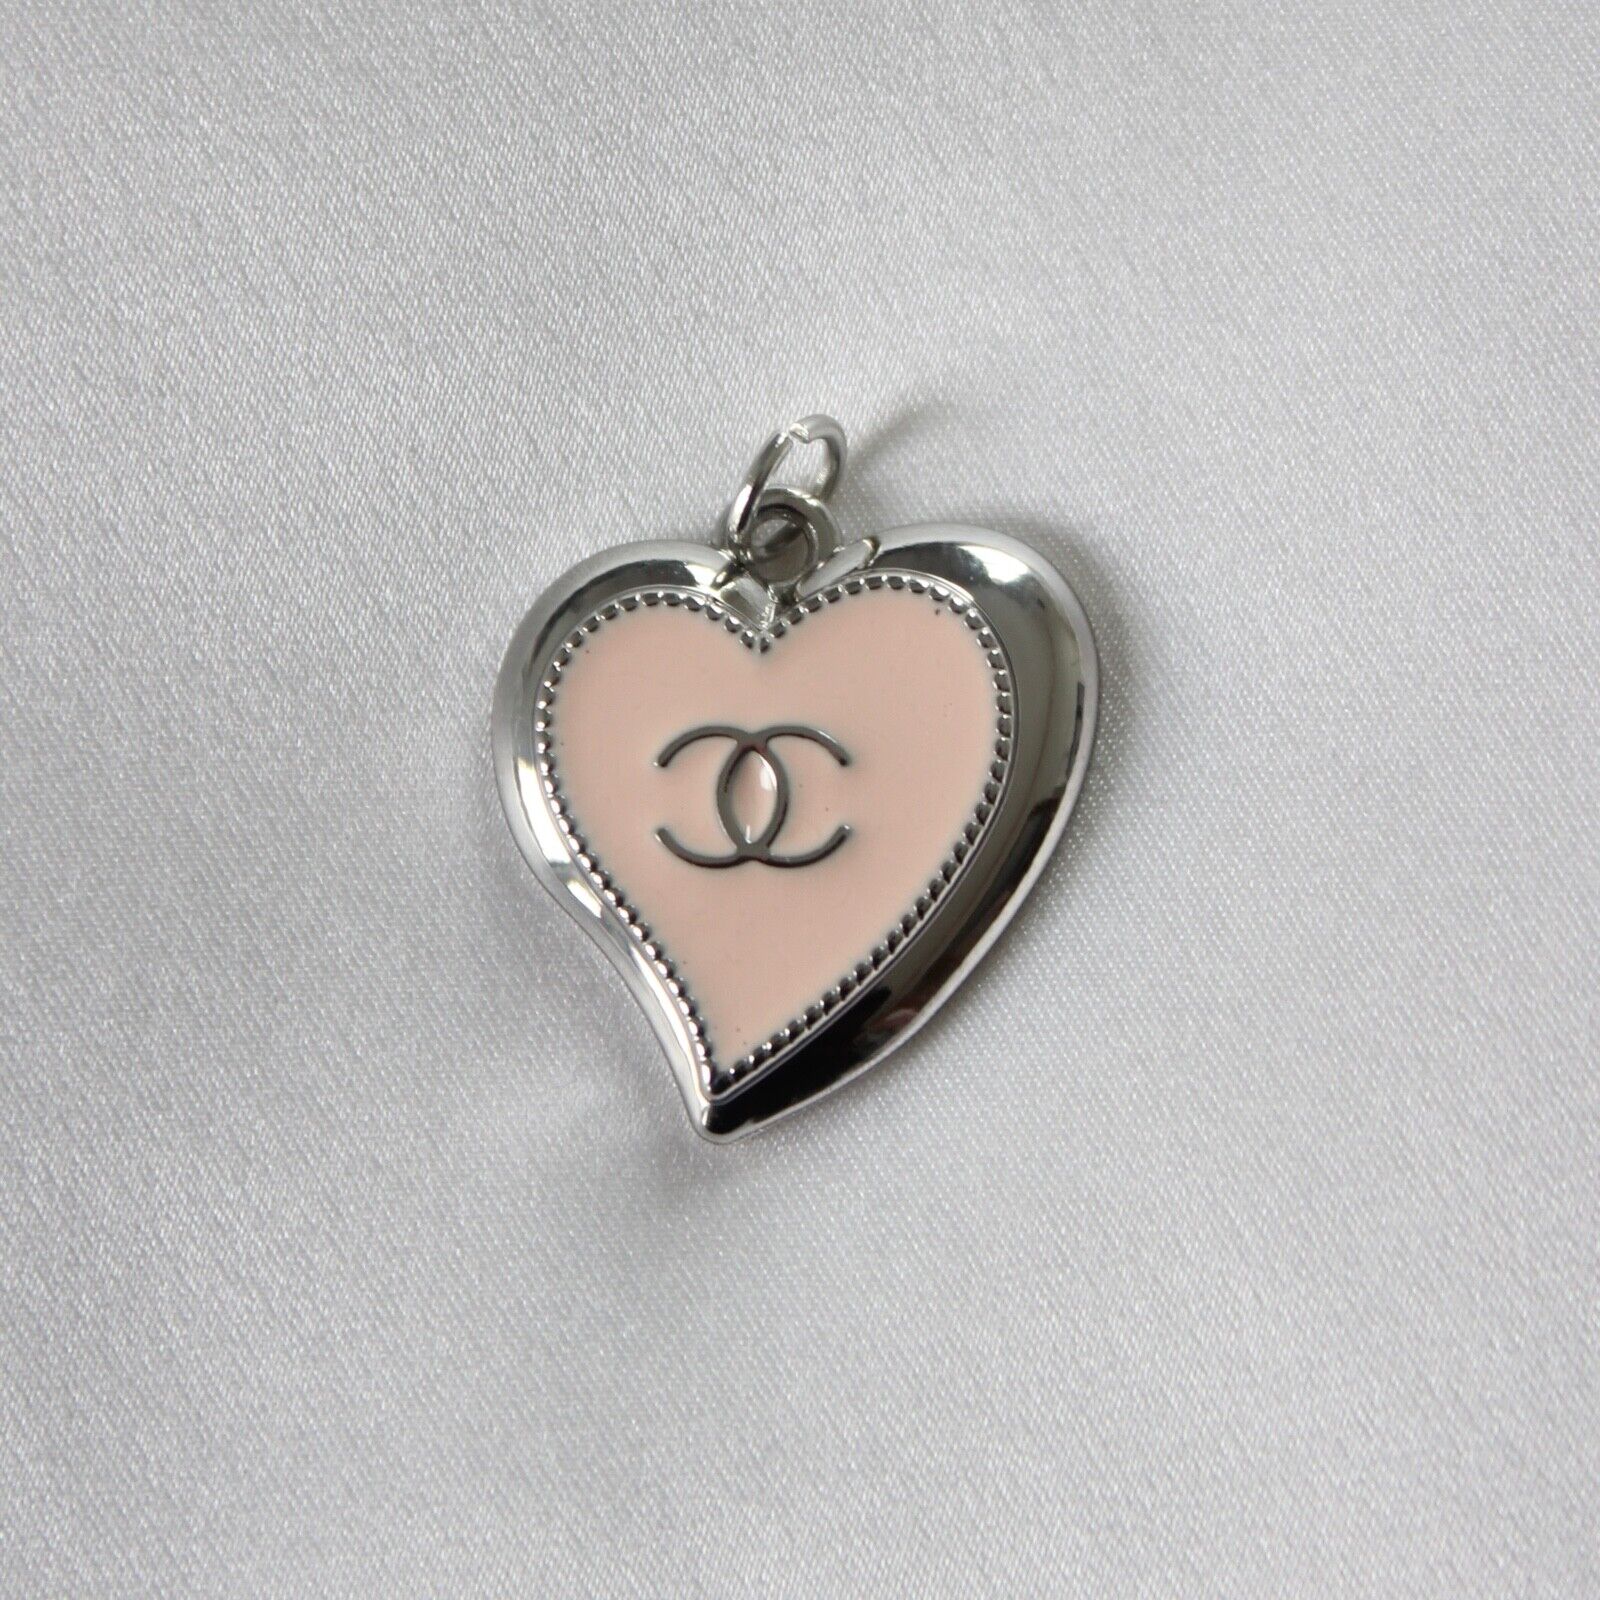 Chanel Zipper Pull Pendant, Light Pink Heart, Silver, 22mm, Stamped